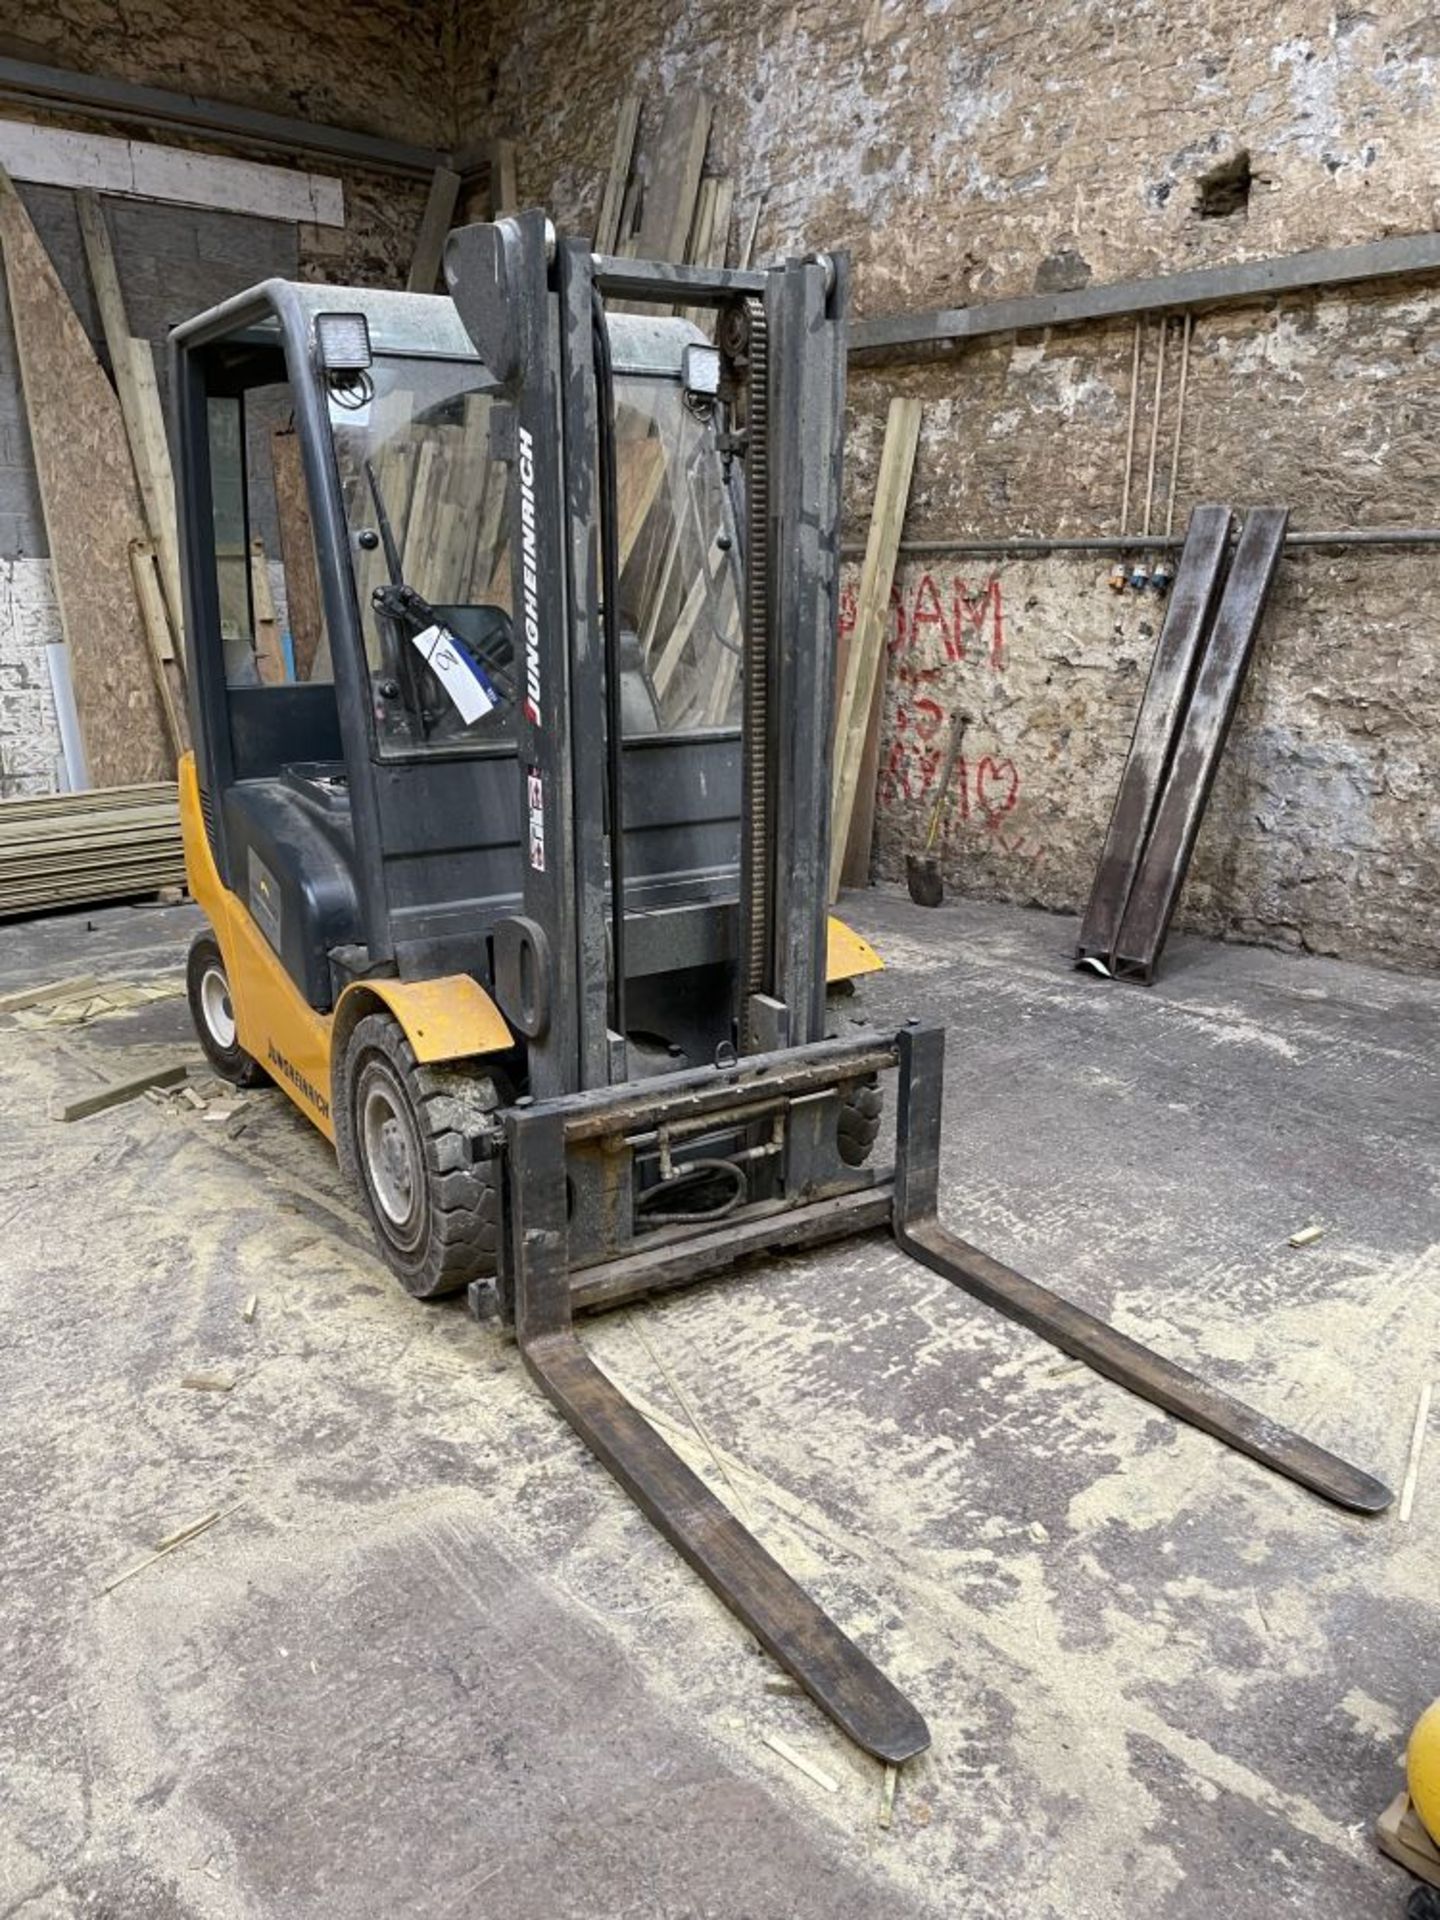 Jungheinrich DFG 425 DIESEL FORK LIFT TRUCK, serial no. FN321361, indicated hours 11,45.3 (at time